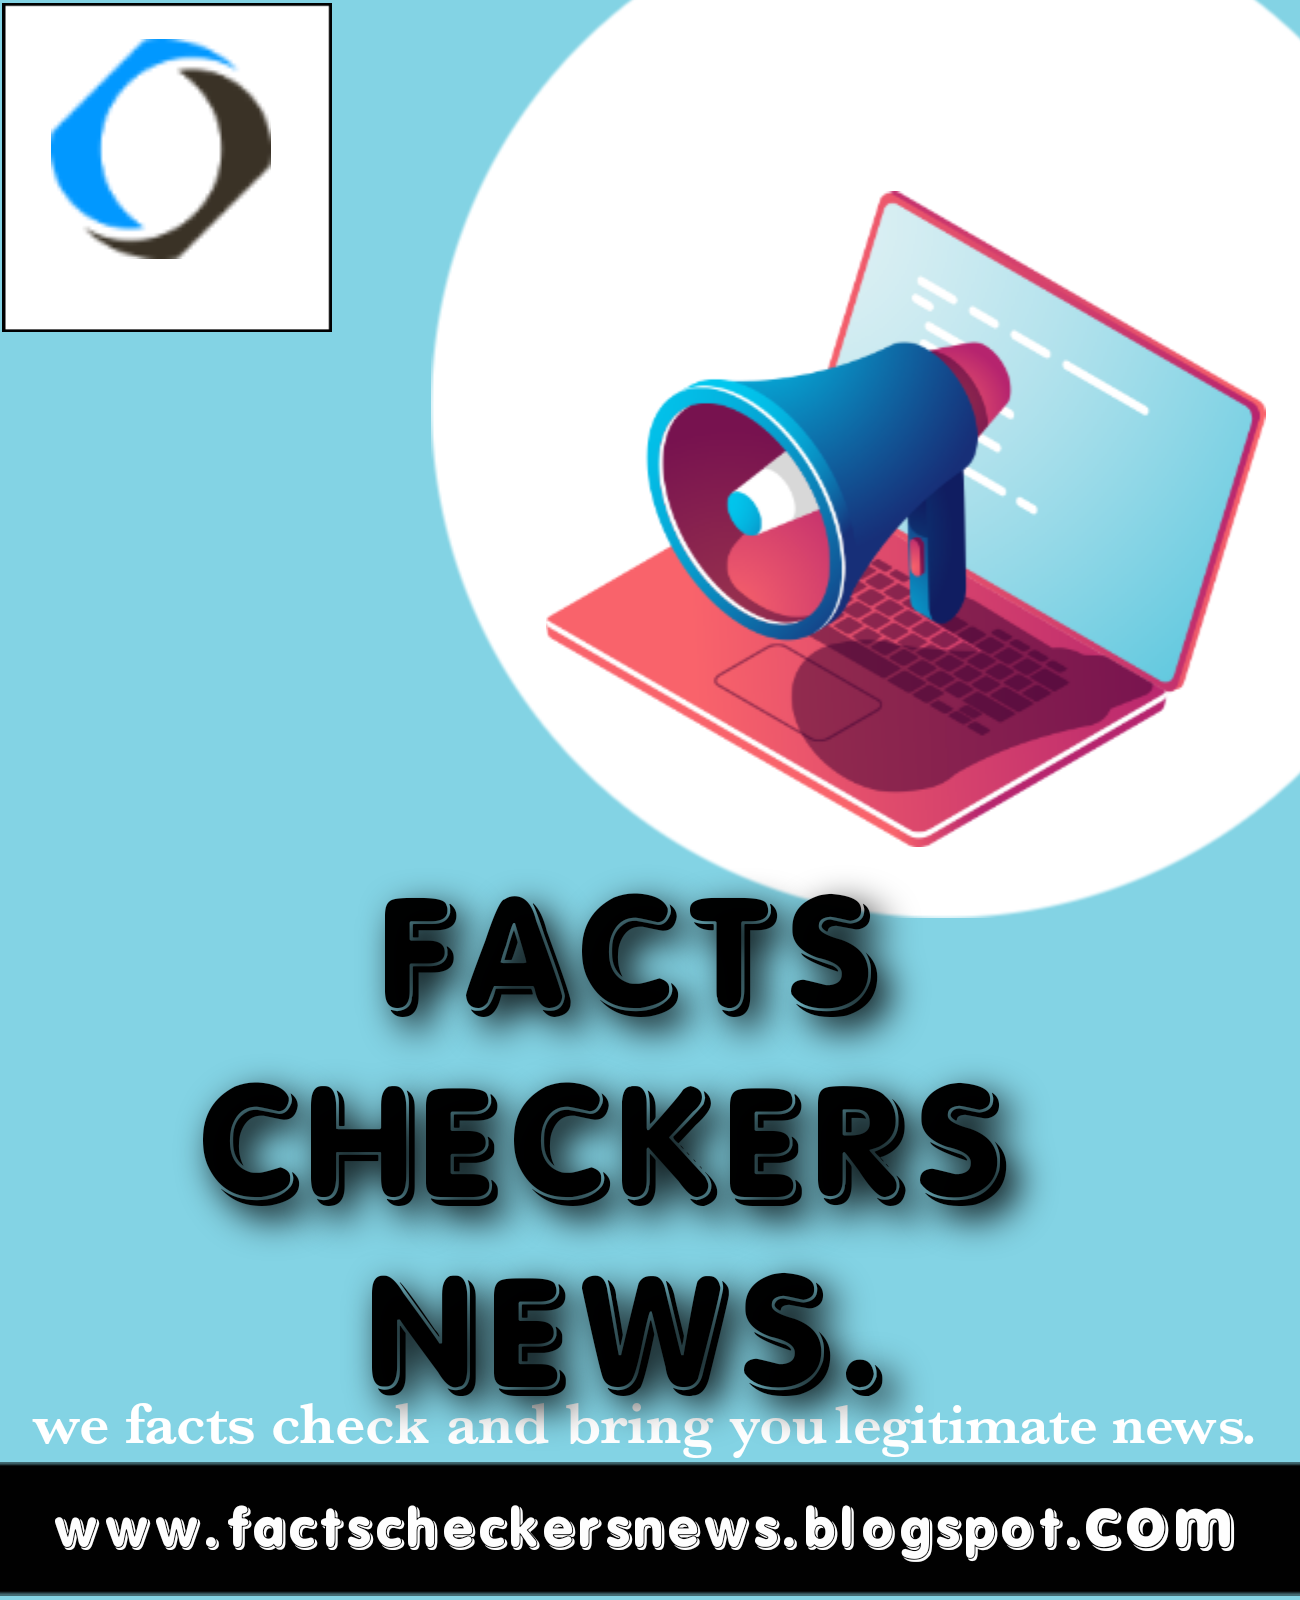 FACTS CHECKERS NEWS